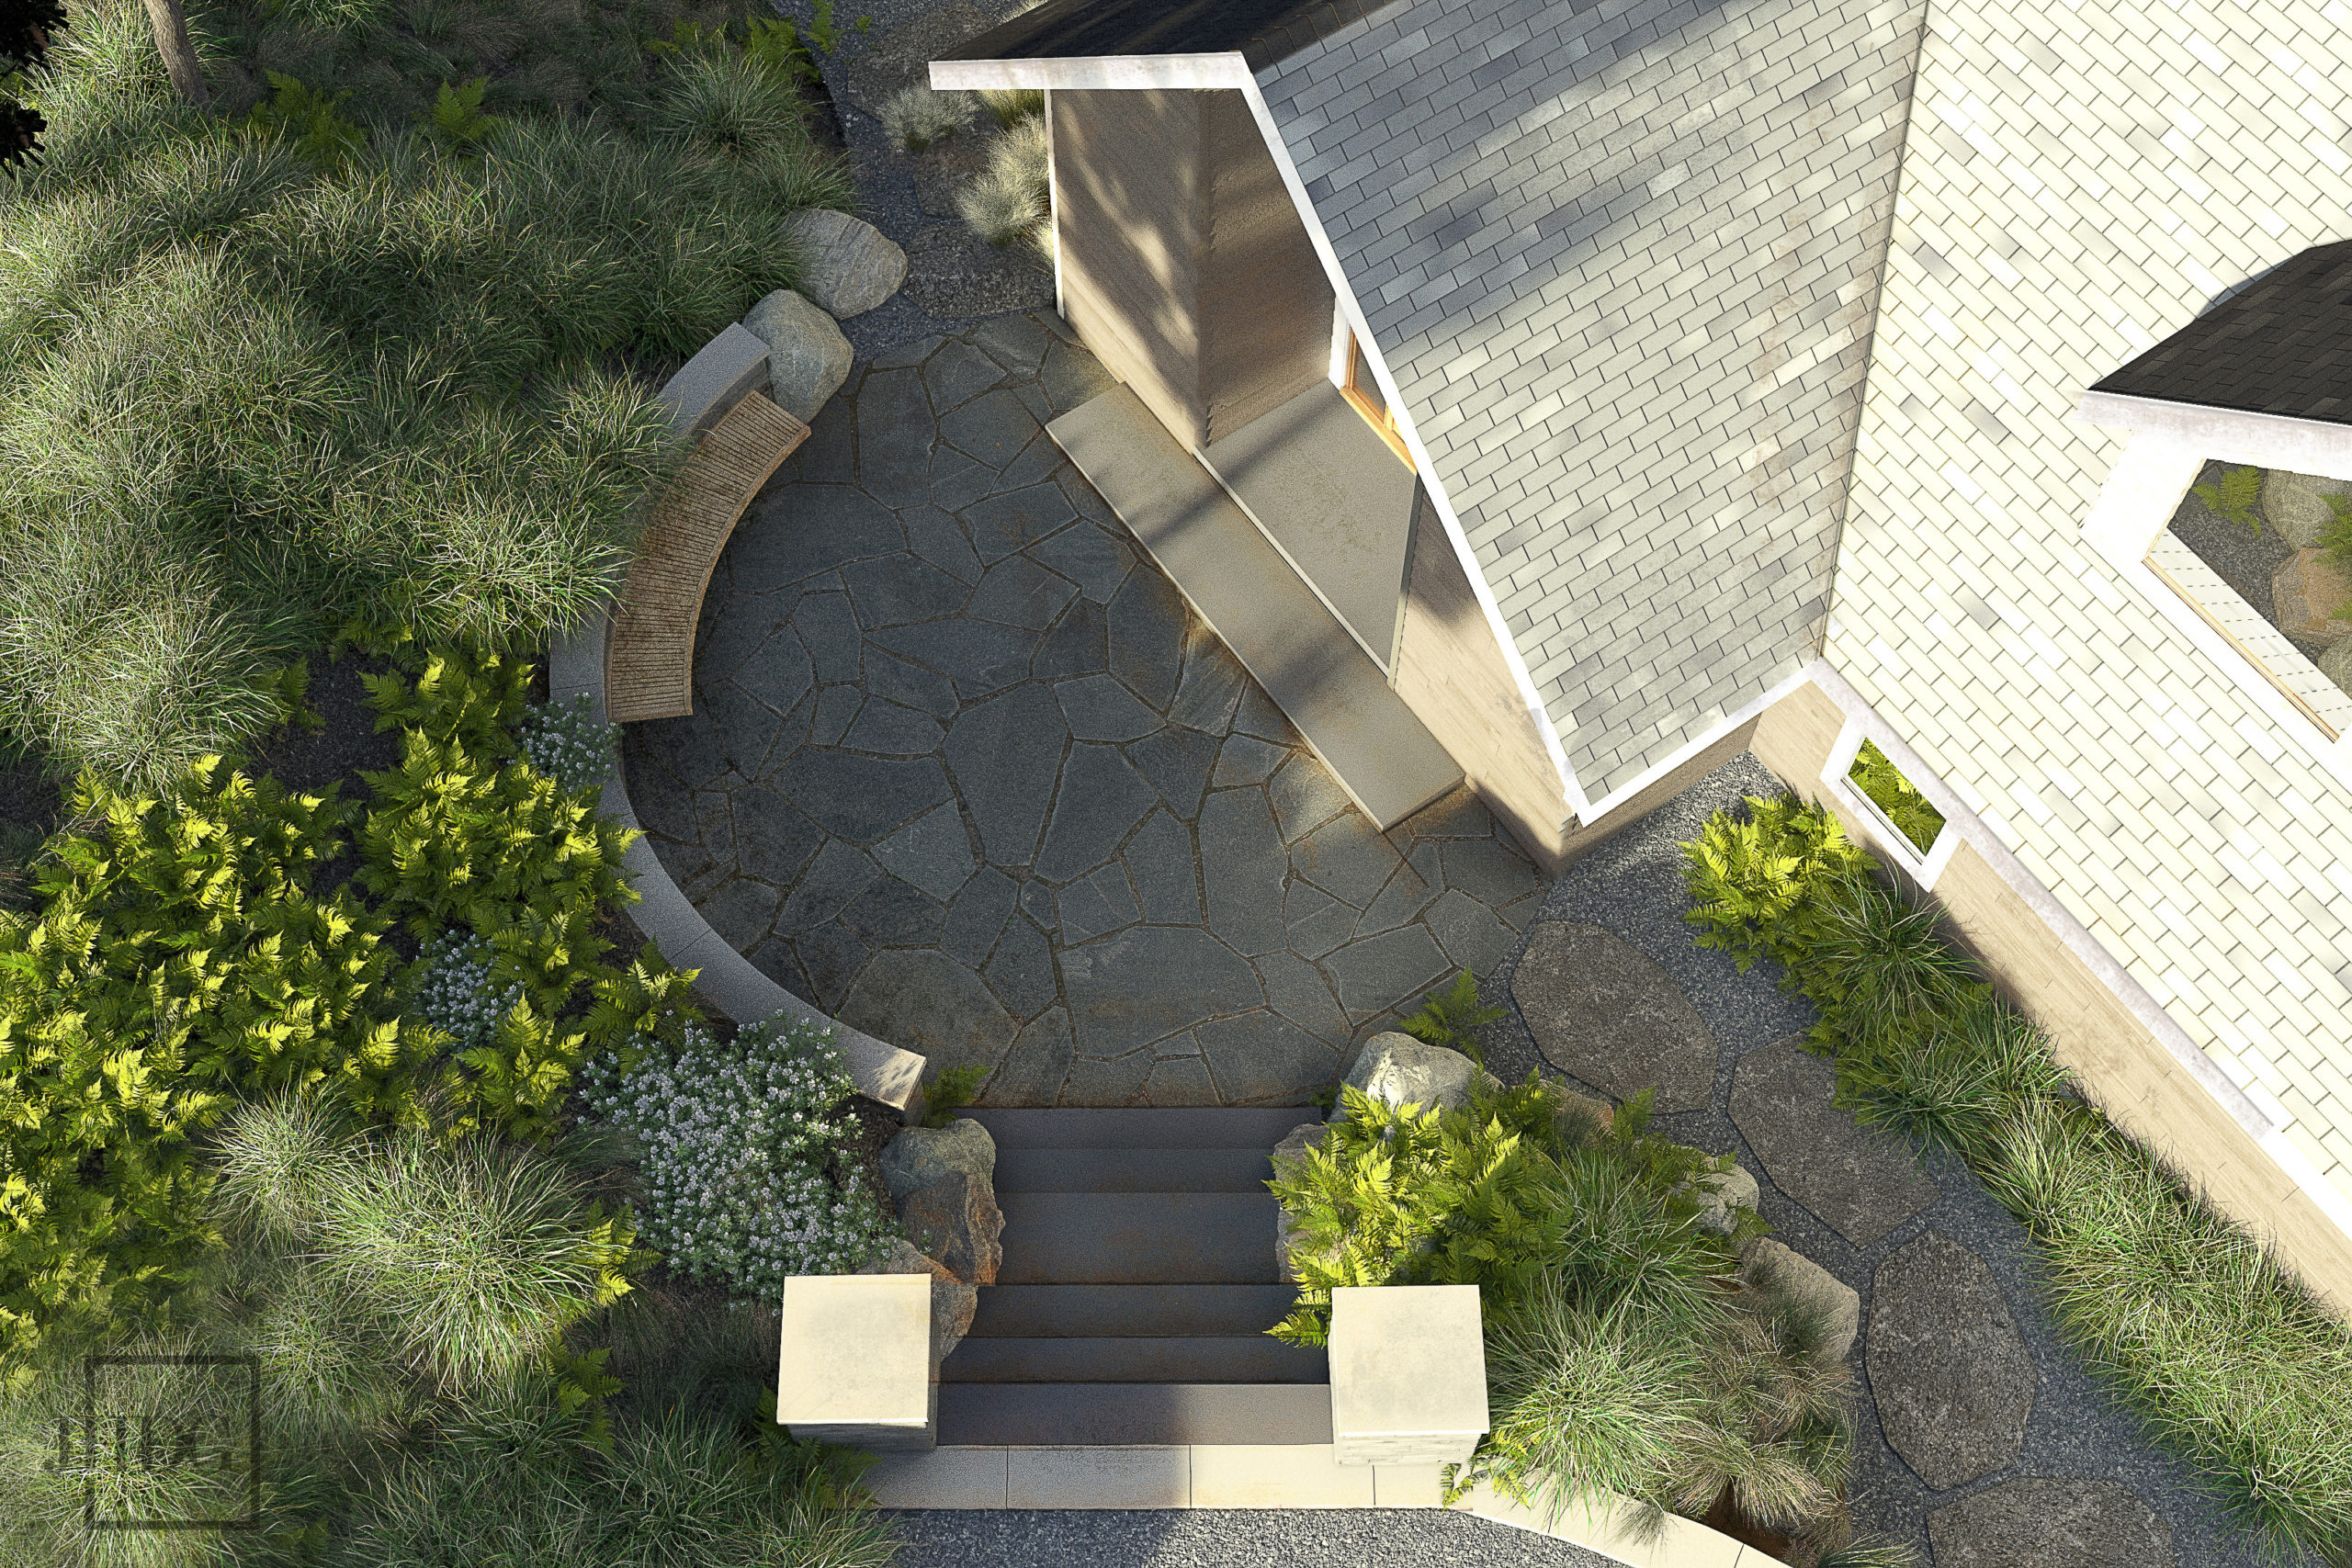 3D Design of front yard and flagstoned porch area with bench seating and stone steps up to parking